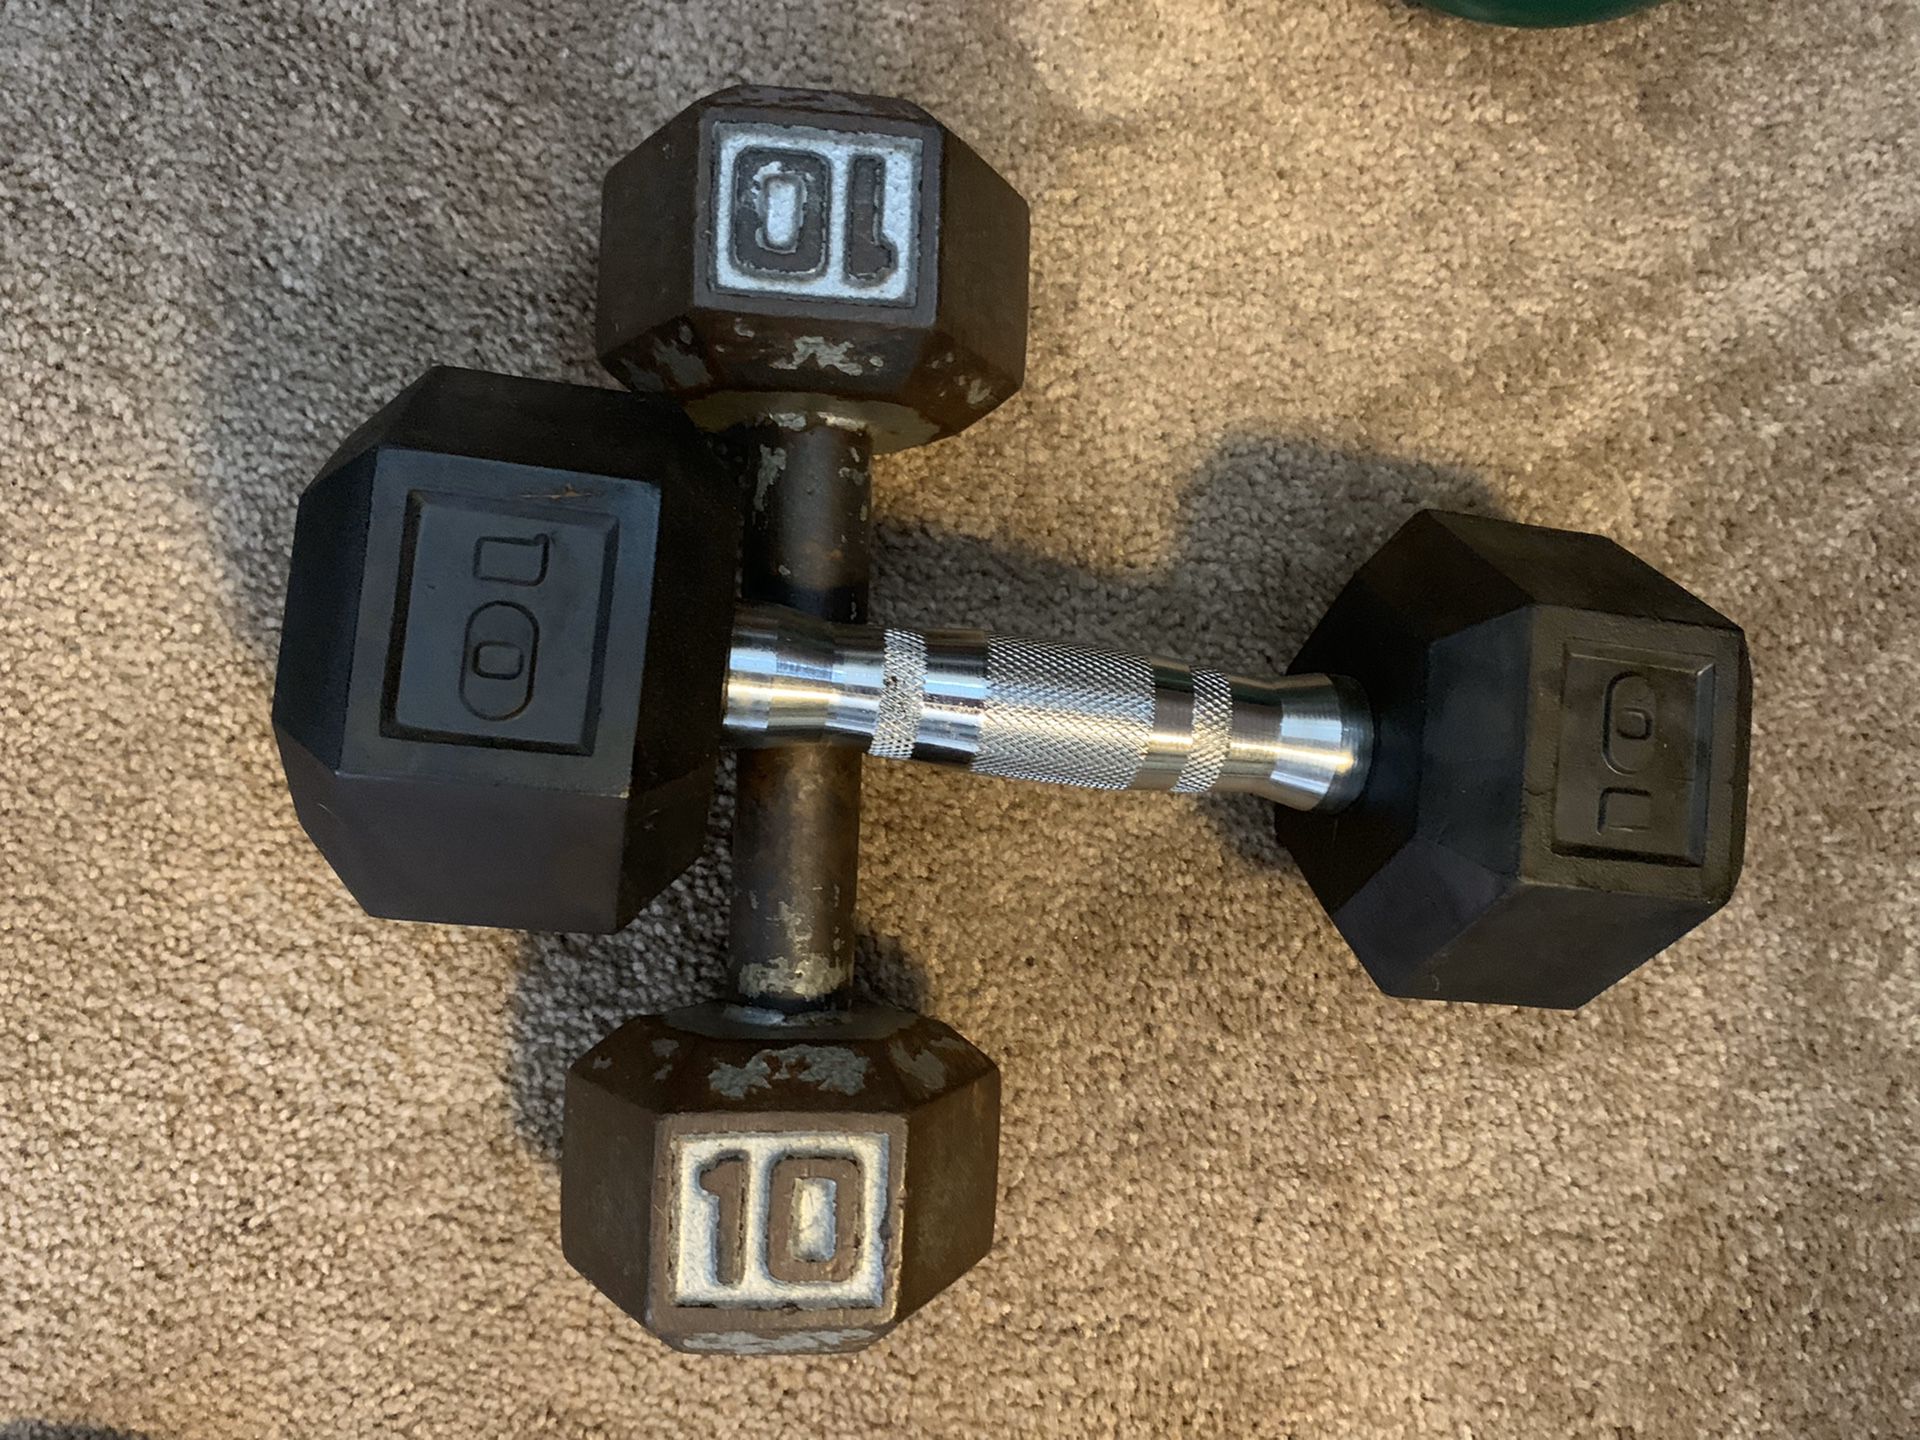 Two dumbbell 10 pounds both for 25$